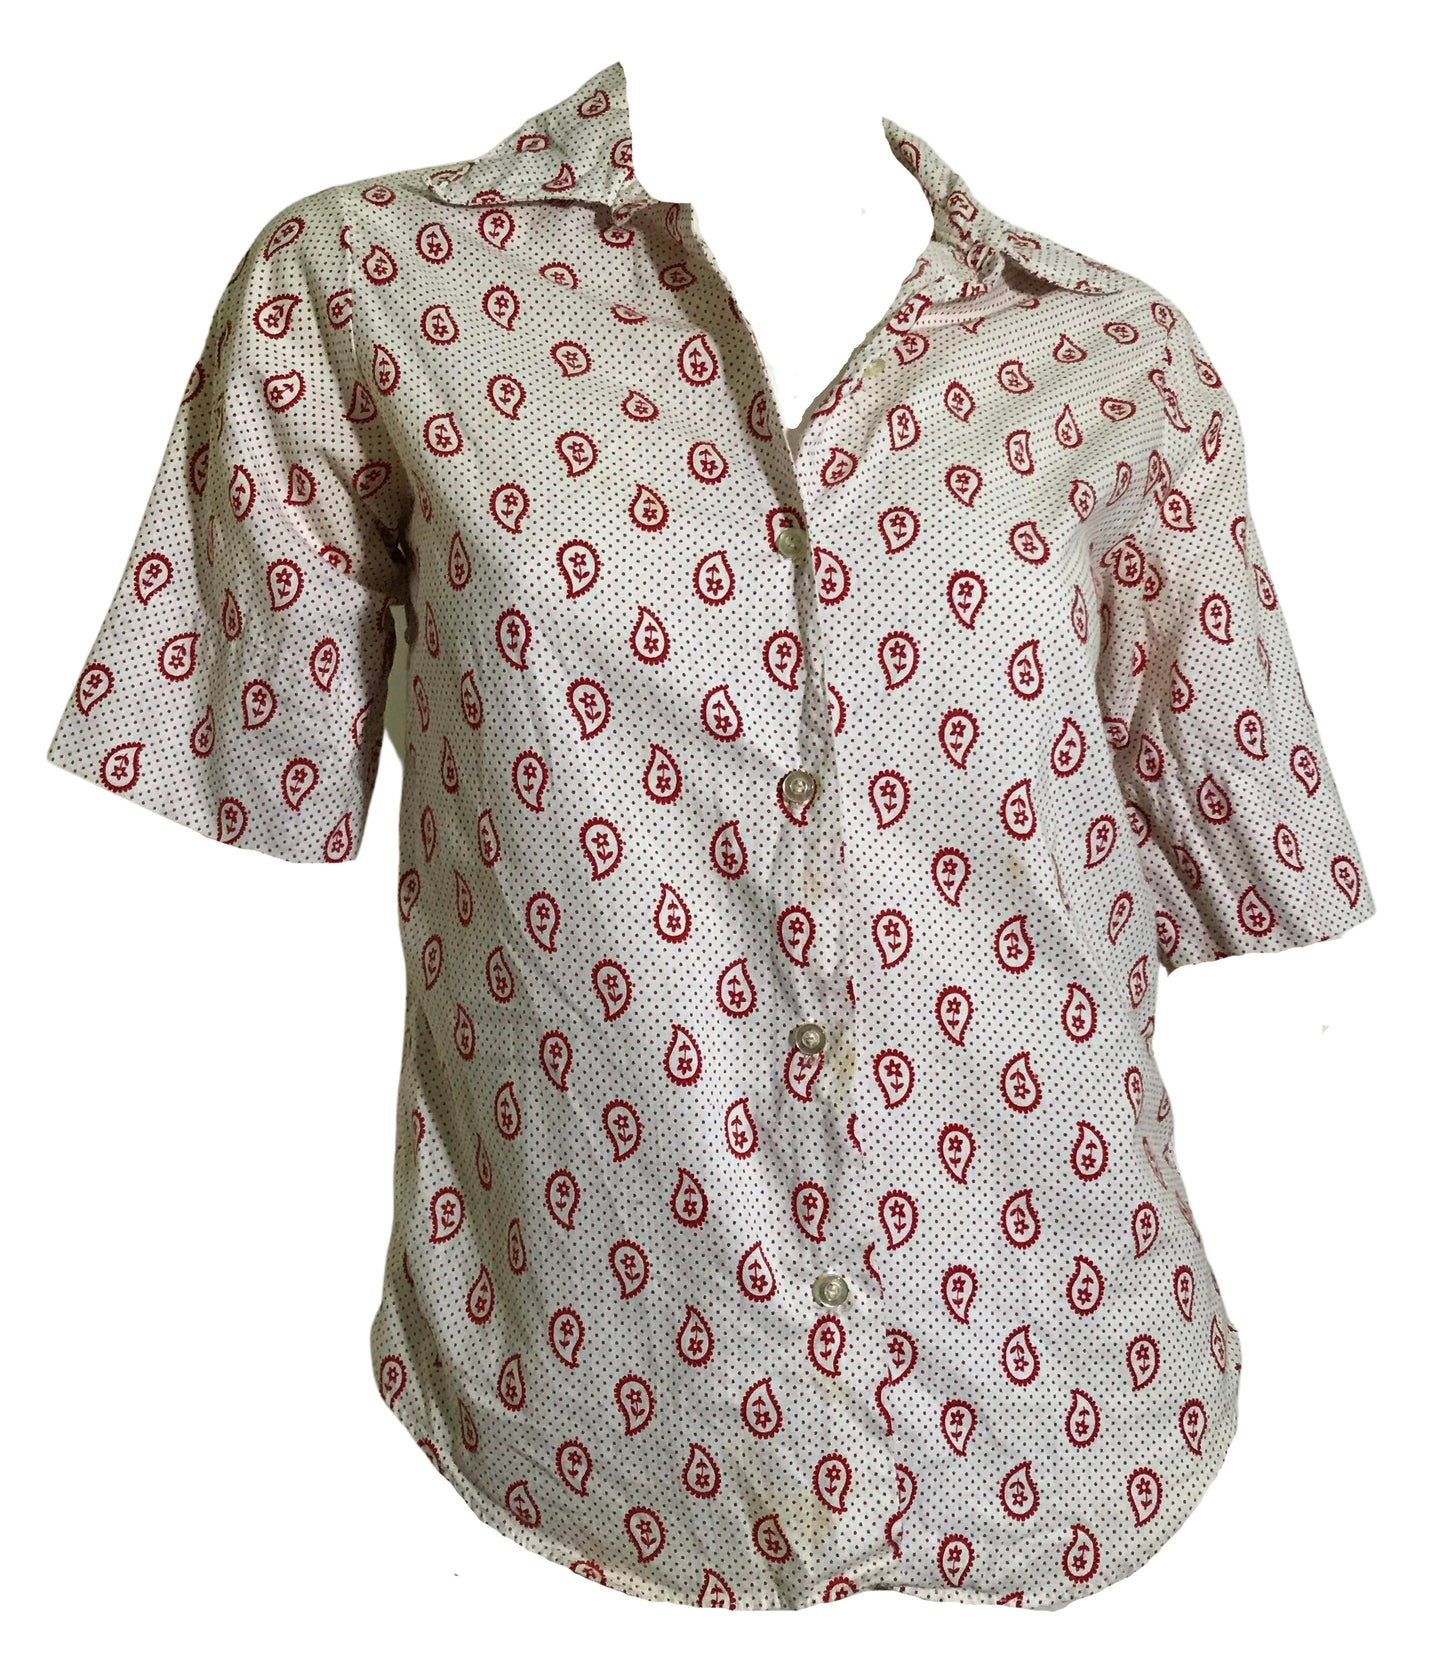 Red and White Paisley Print Blouse circa 1960s